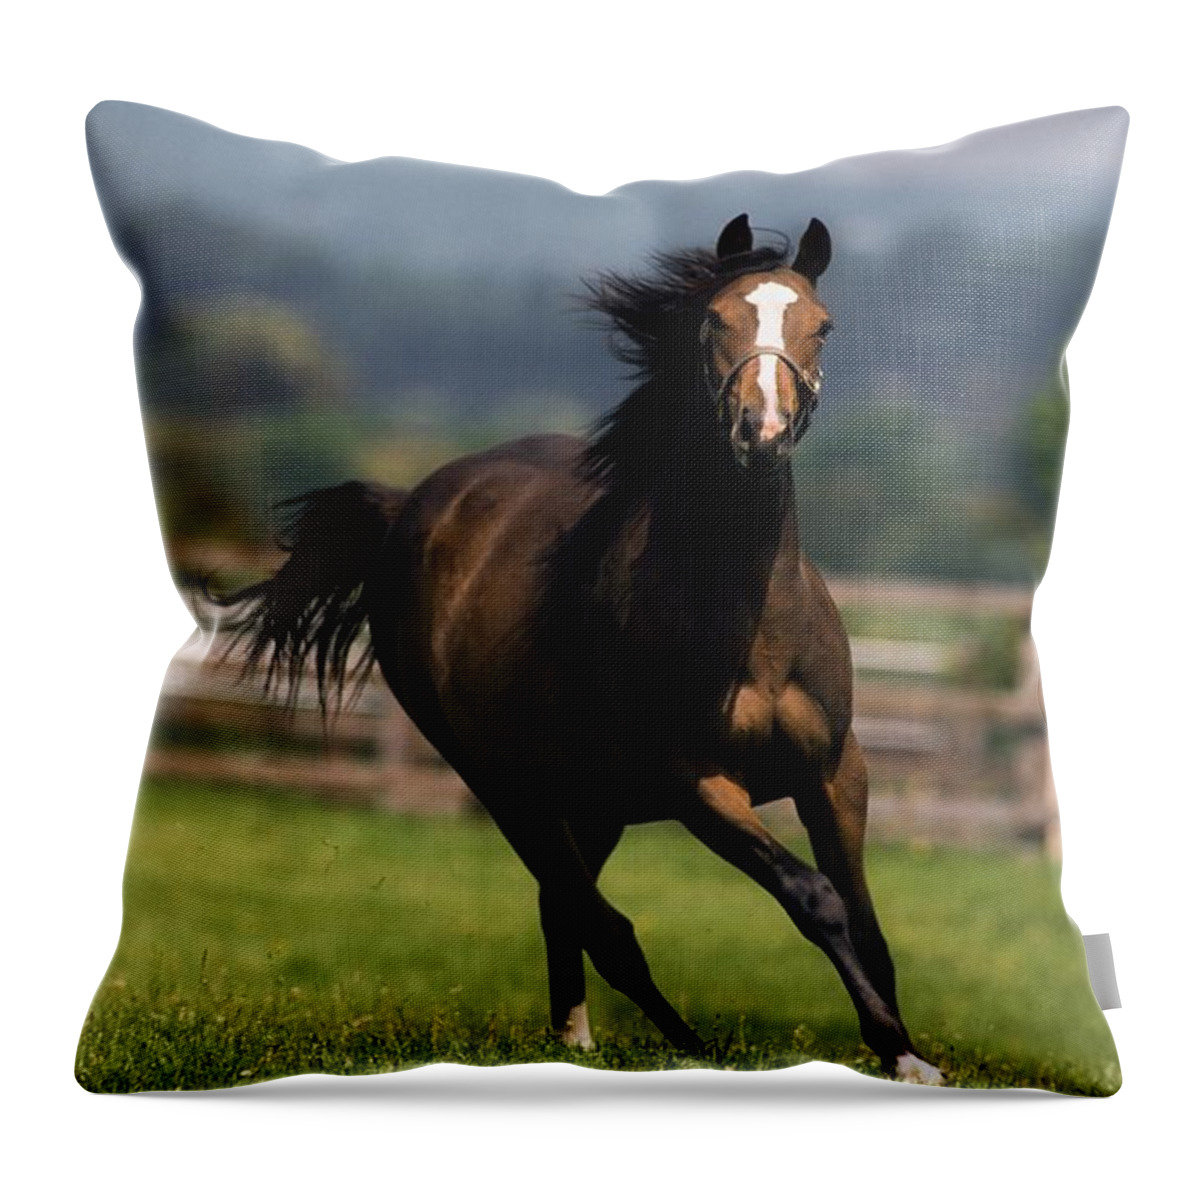 Animals Throw Pillow featuring the photograph Thoroughbred Horses, Yearlings by The Irish Image Collection